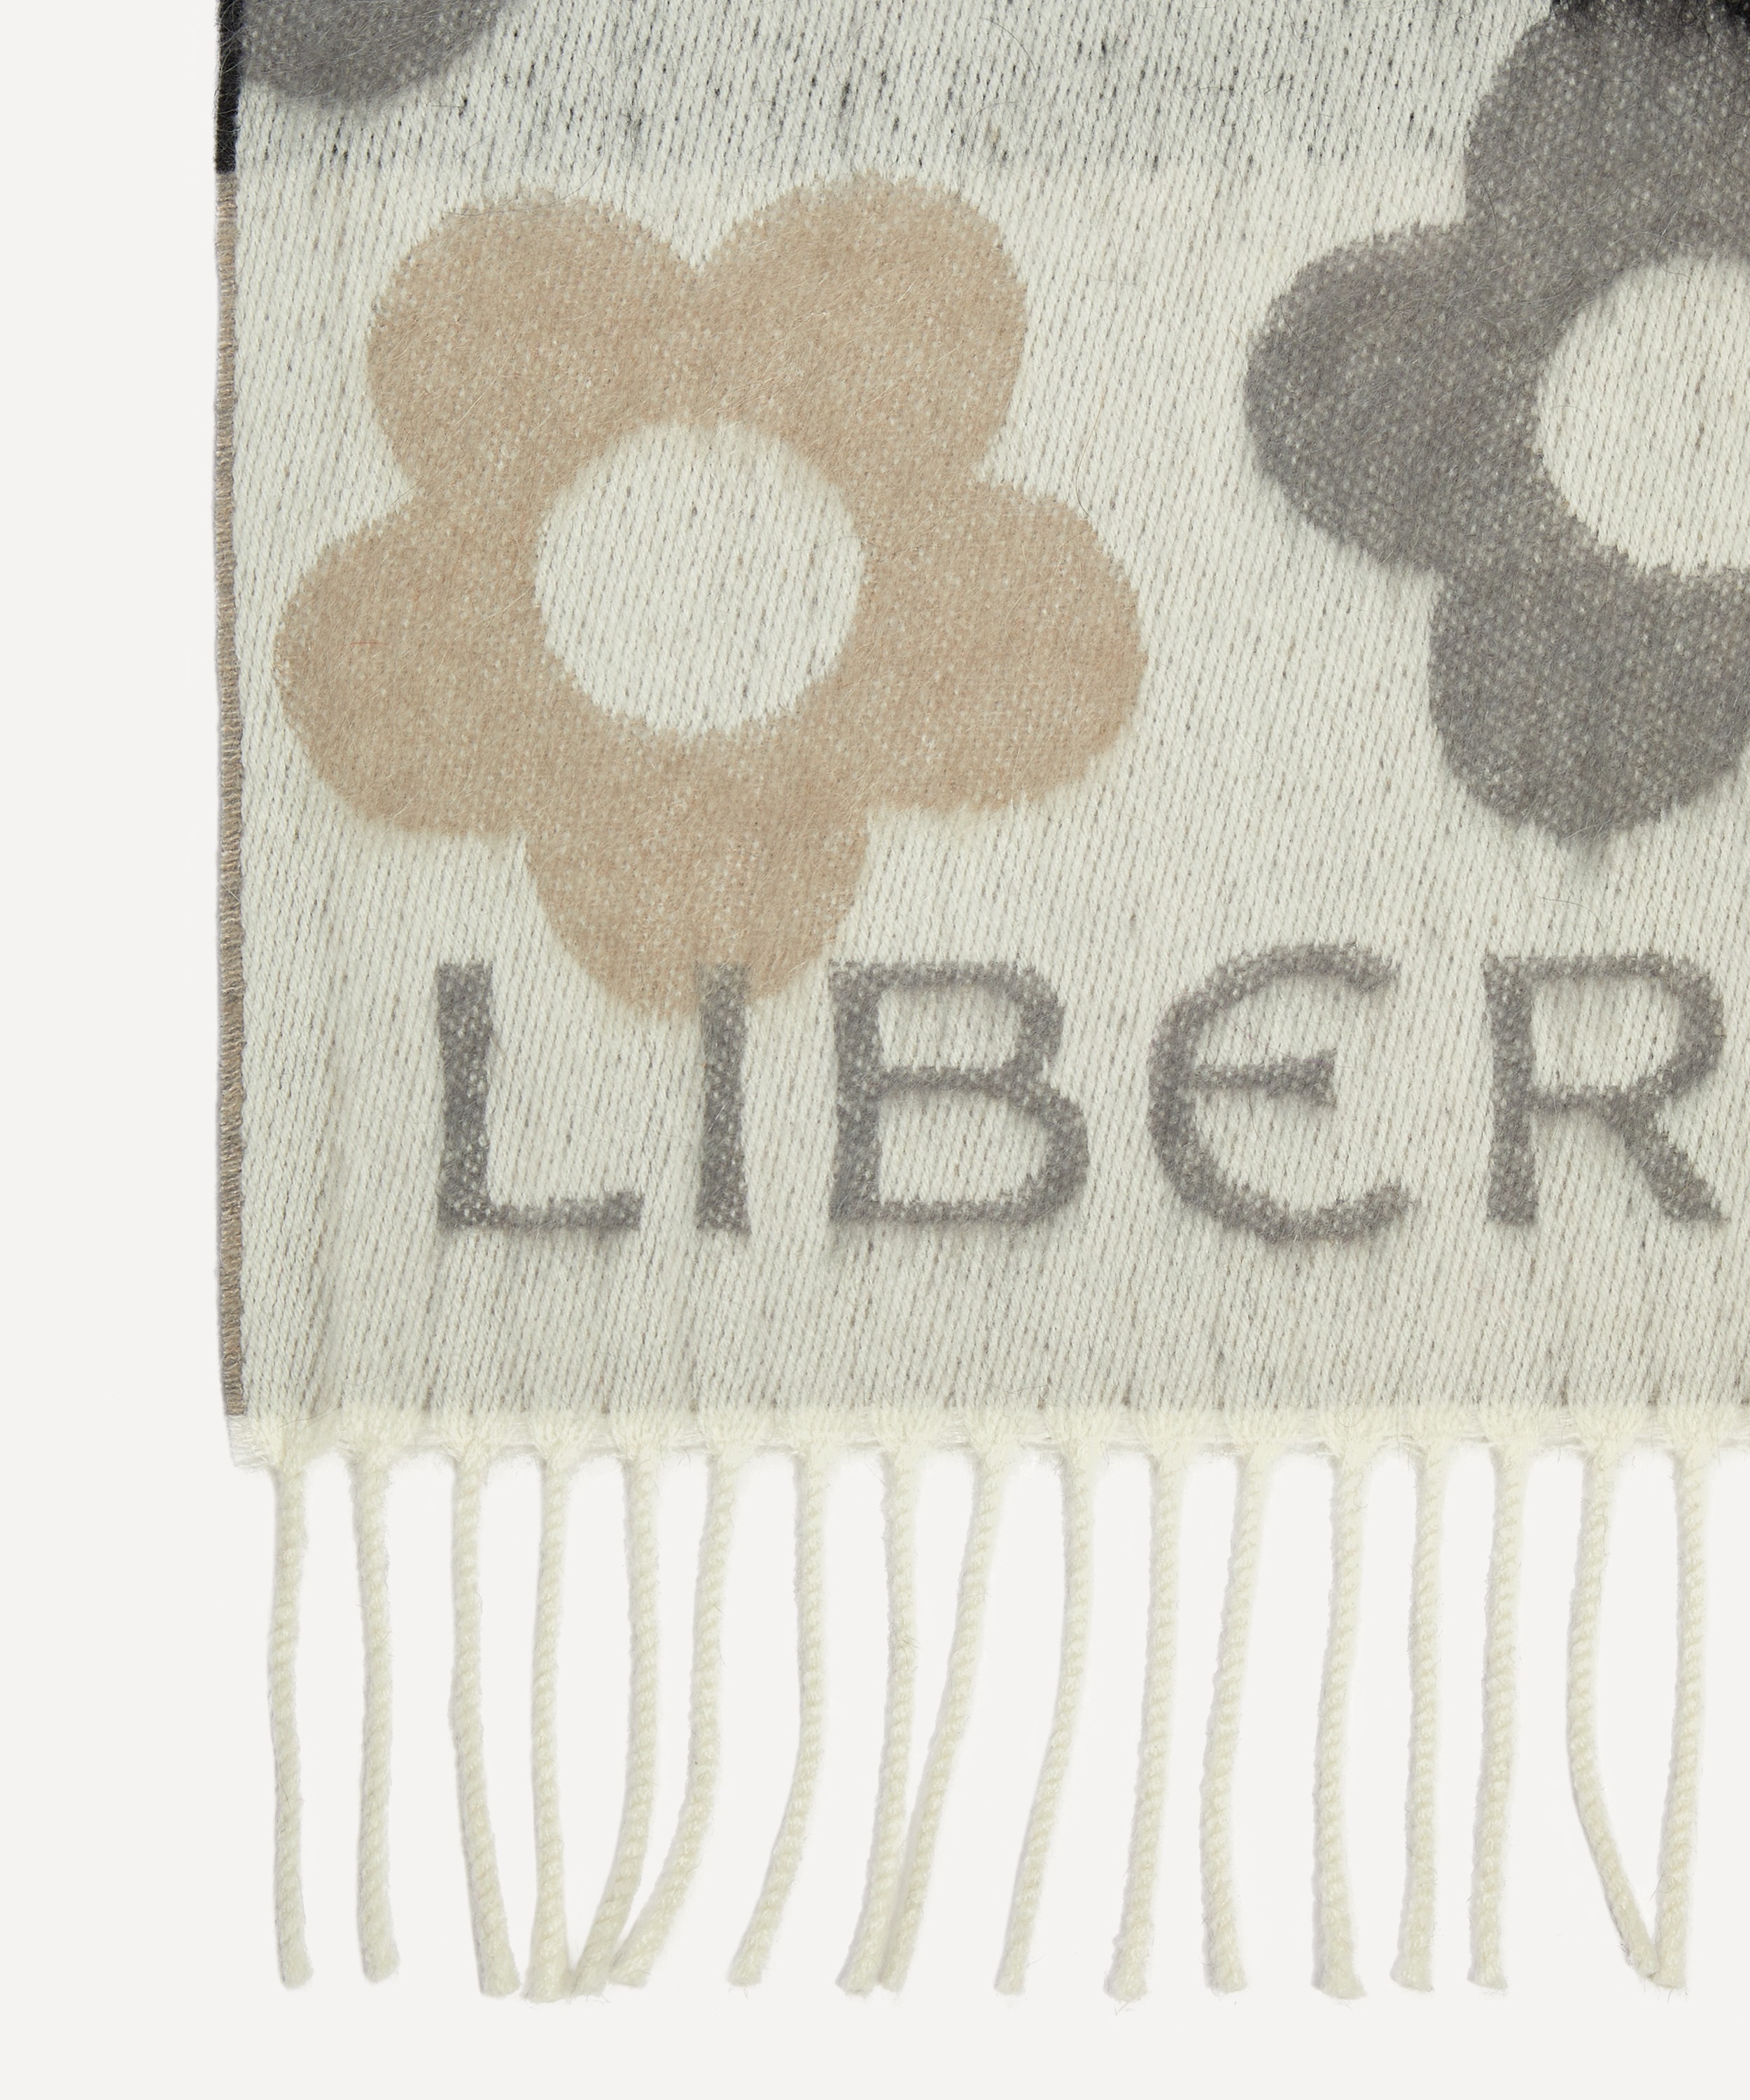 Liberty - Michelle Frances Flower 35X240 Mohair Scarf image number 4